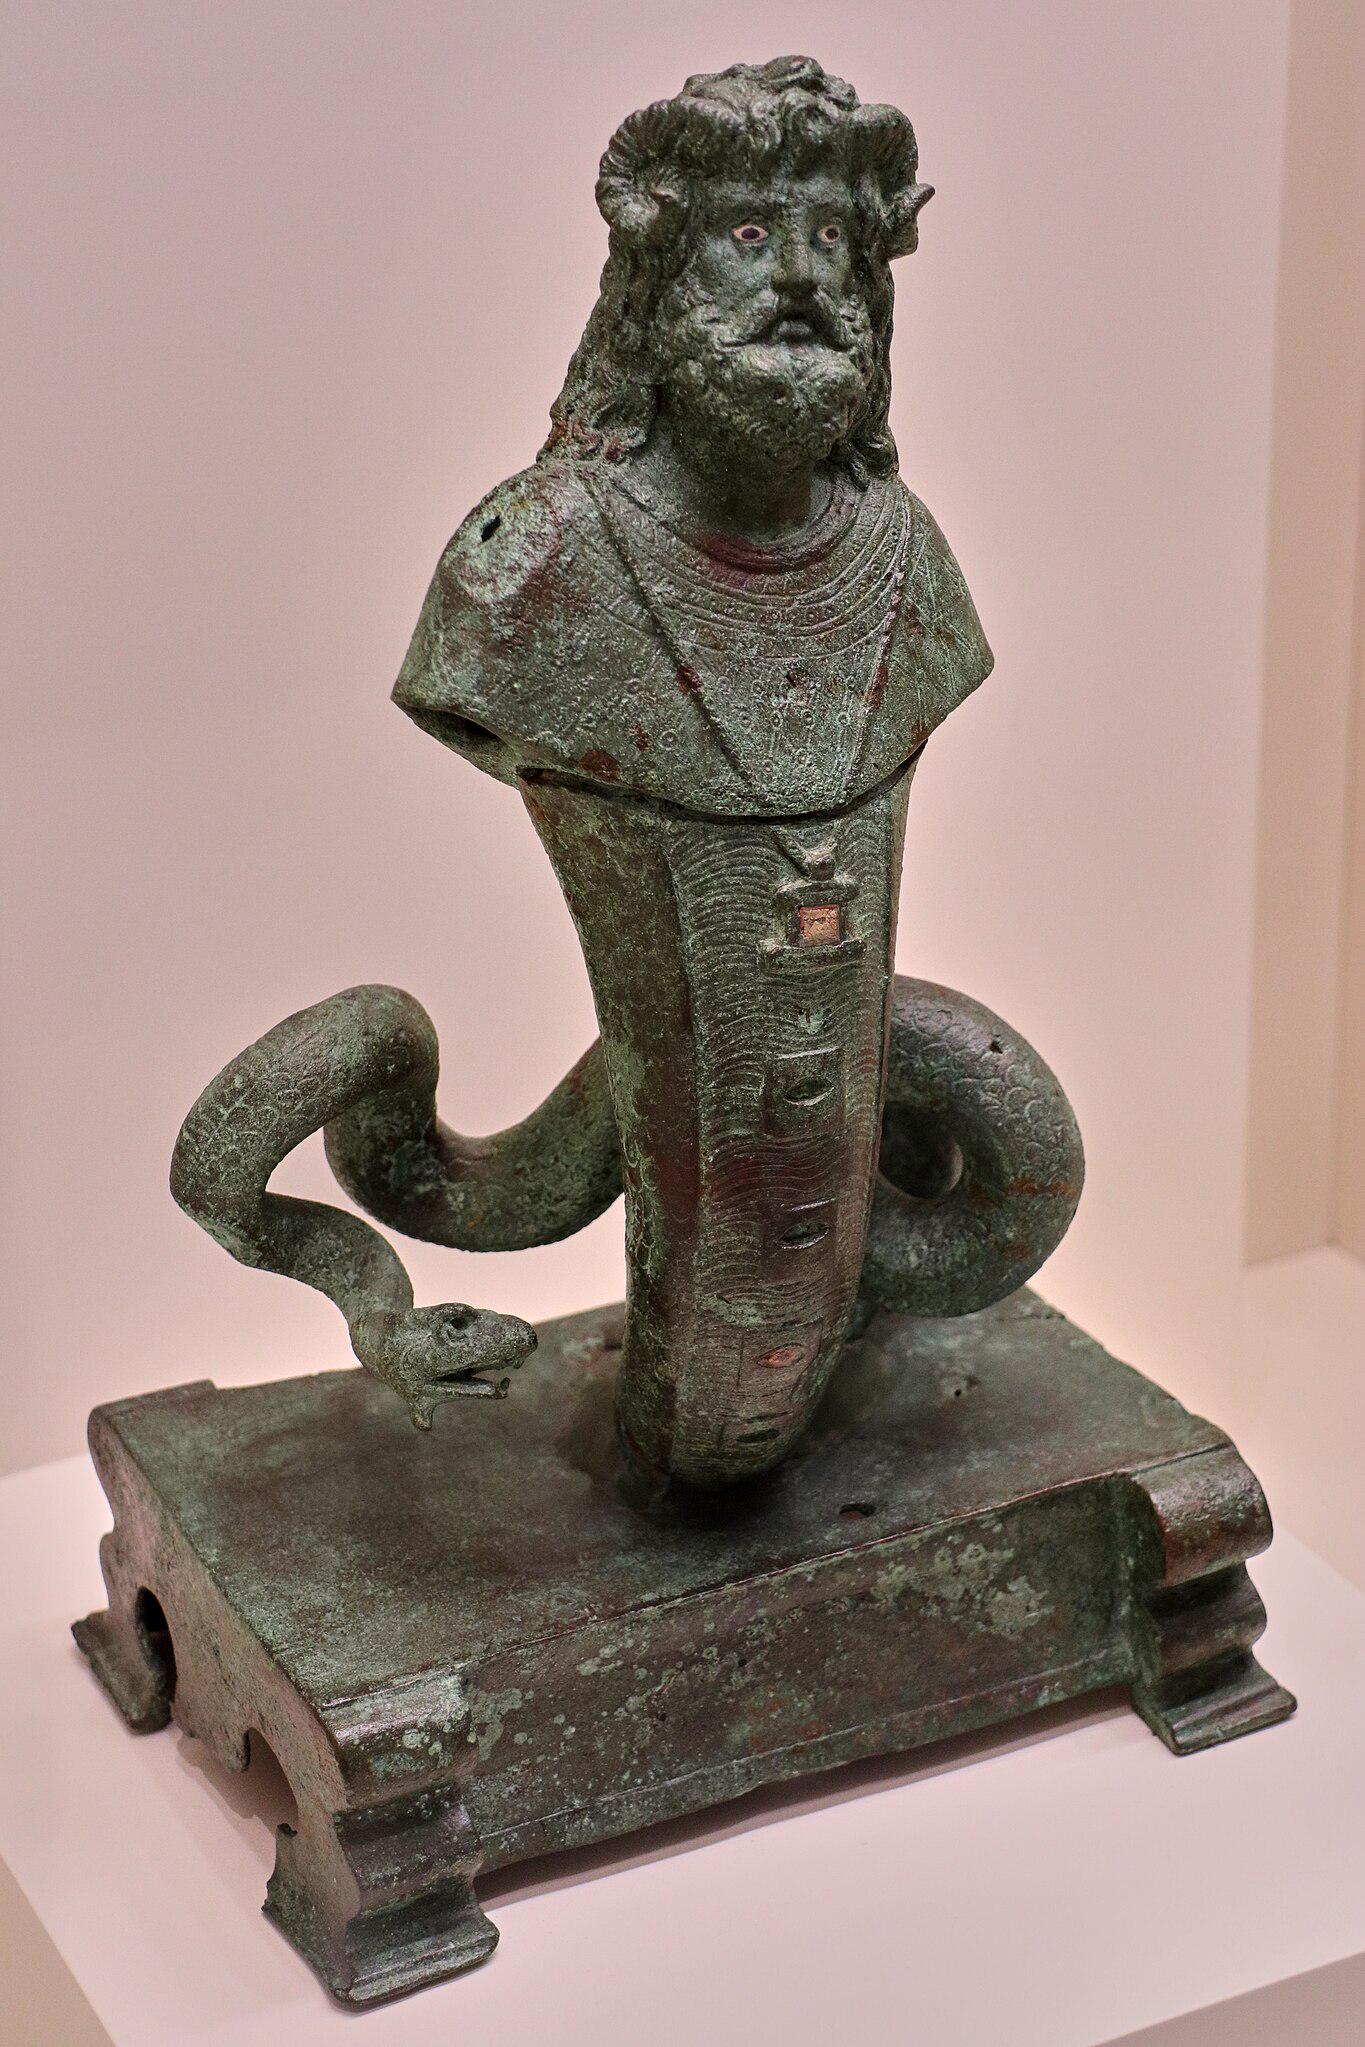 copper alloy statuette of the god Serapis Amun Agathodaemon (Egypt late Hellenistic - early Roman period 1st century BC - 1st century AD,National Archaeological Museum of Athens).jpeg